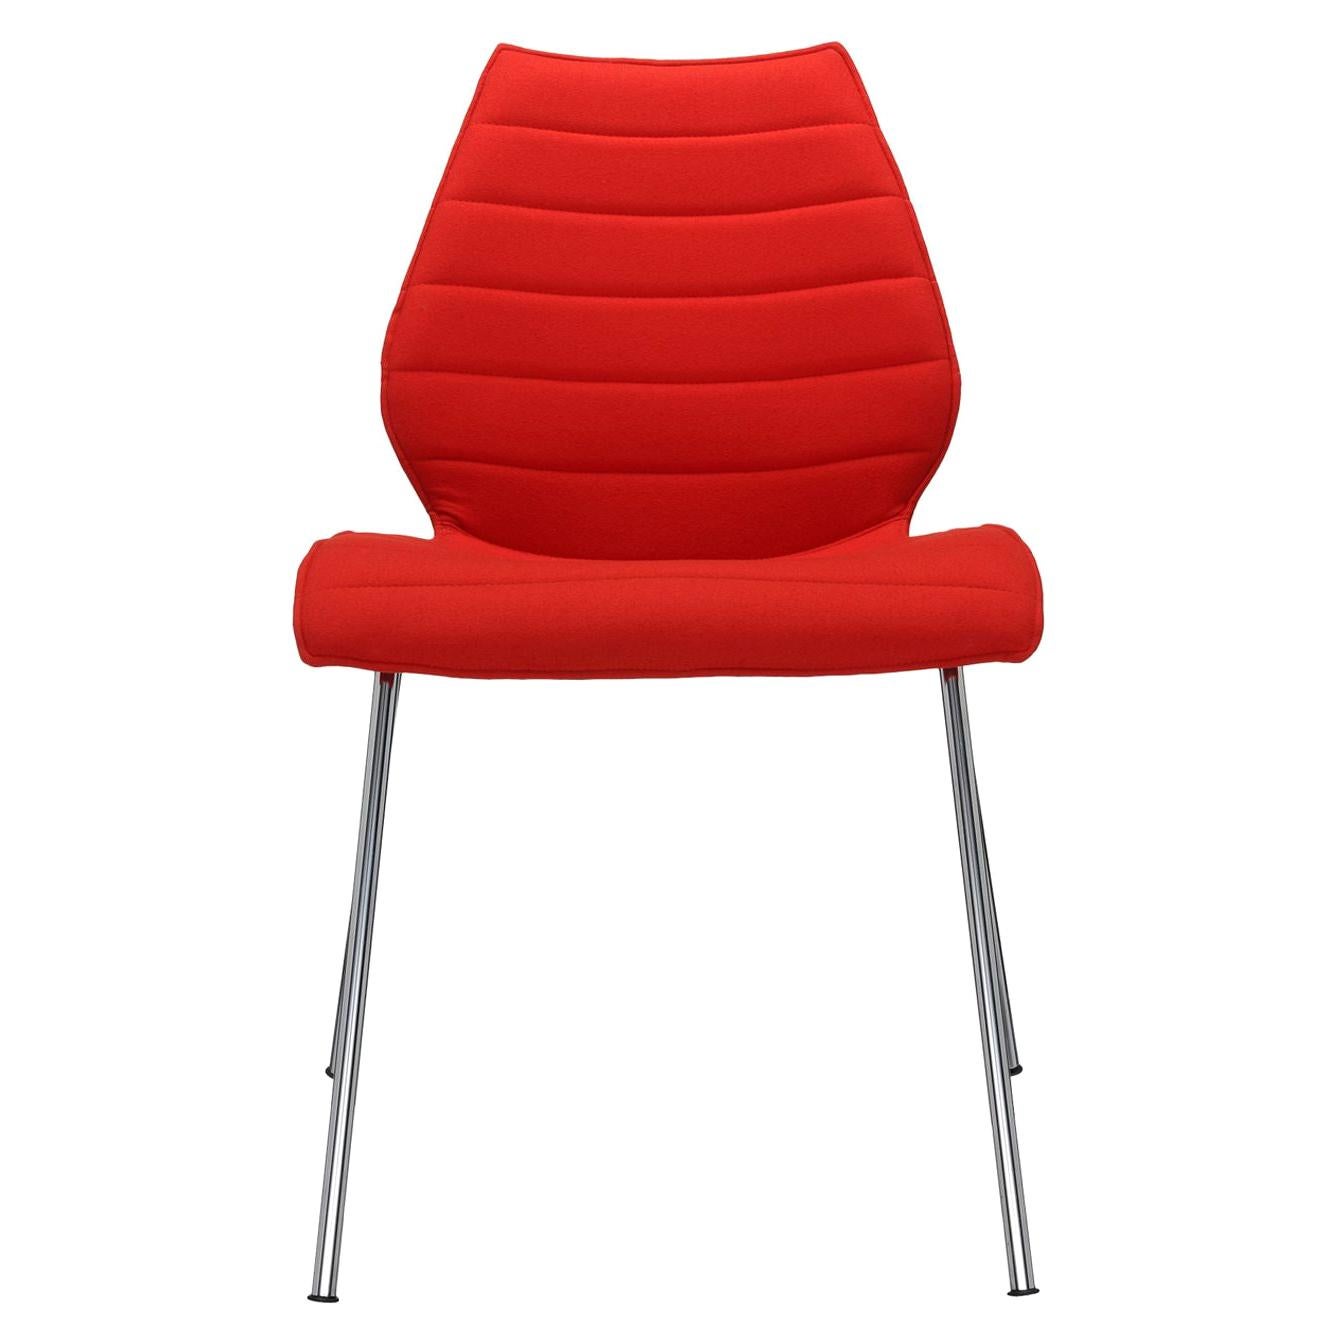 Set of 2 Kartell Maui Soft Trevira Chair in Red by Vico Magistretti